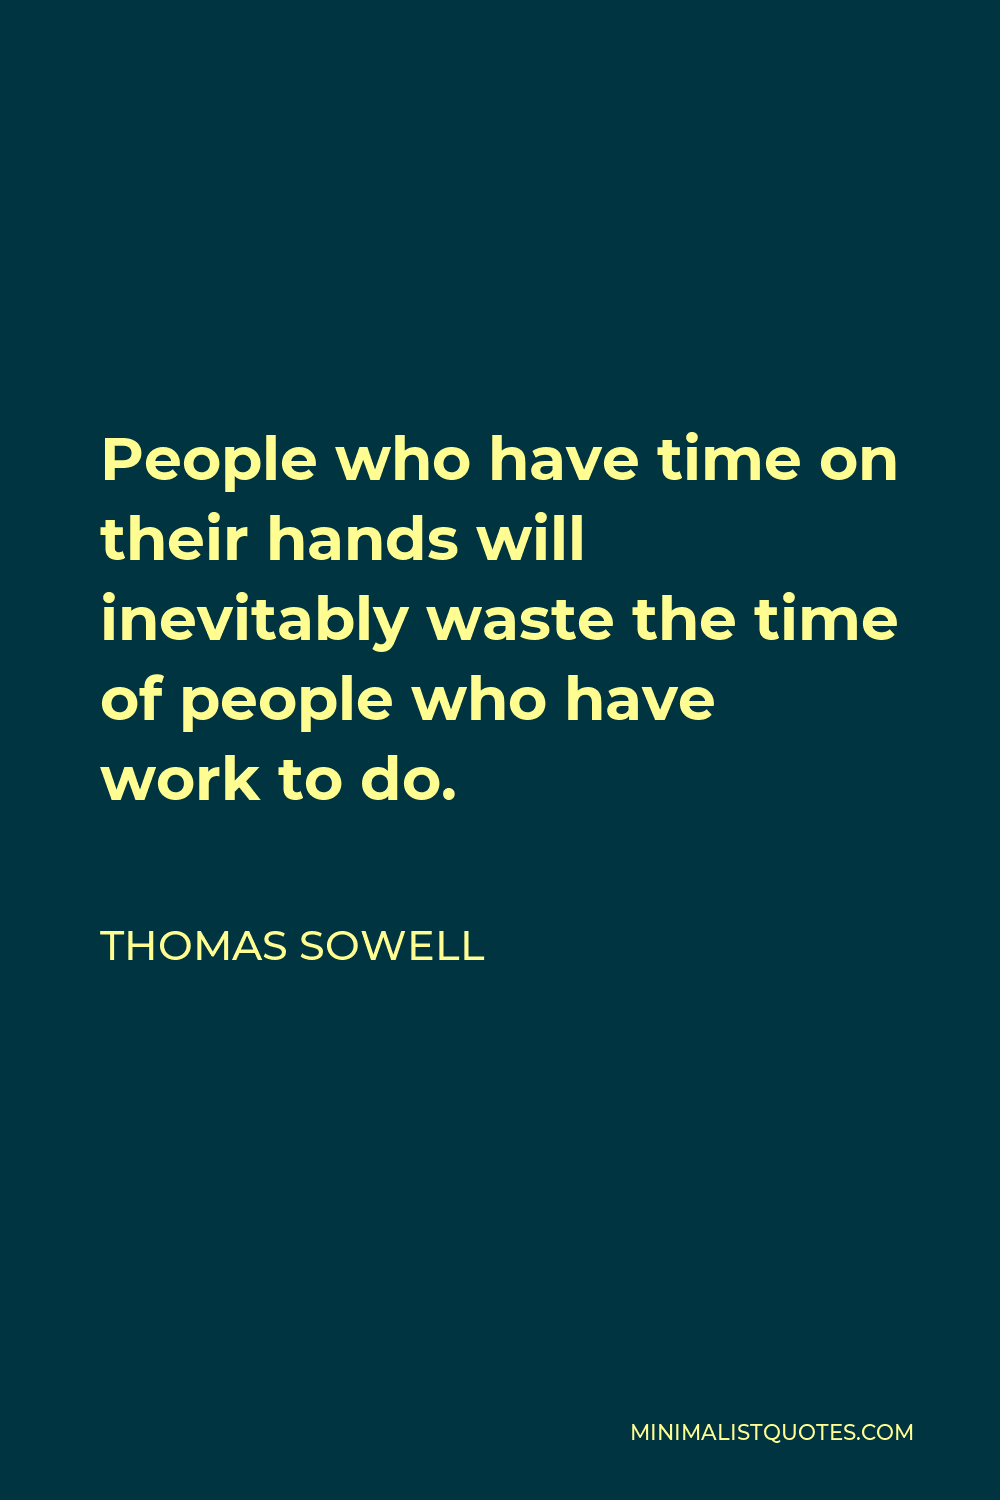 Thomas Sowell Quote - People who have time on their hands will inevitably waste the time of people who have work to do.